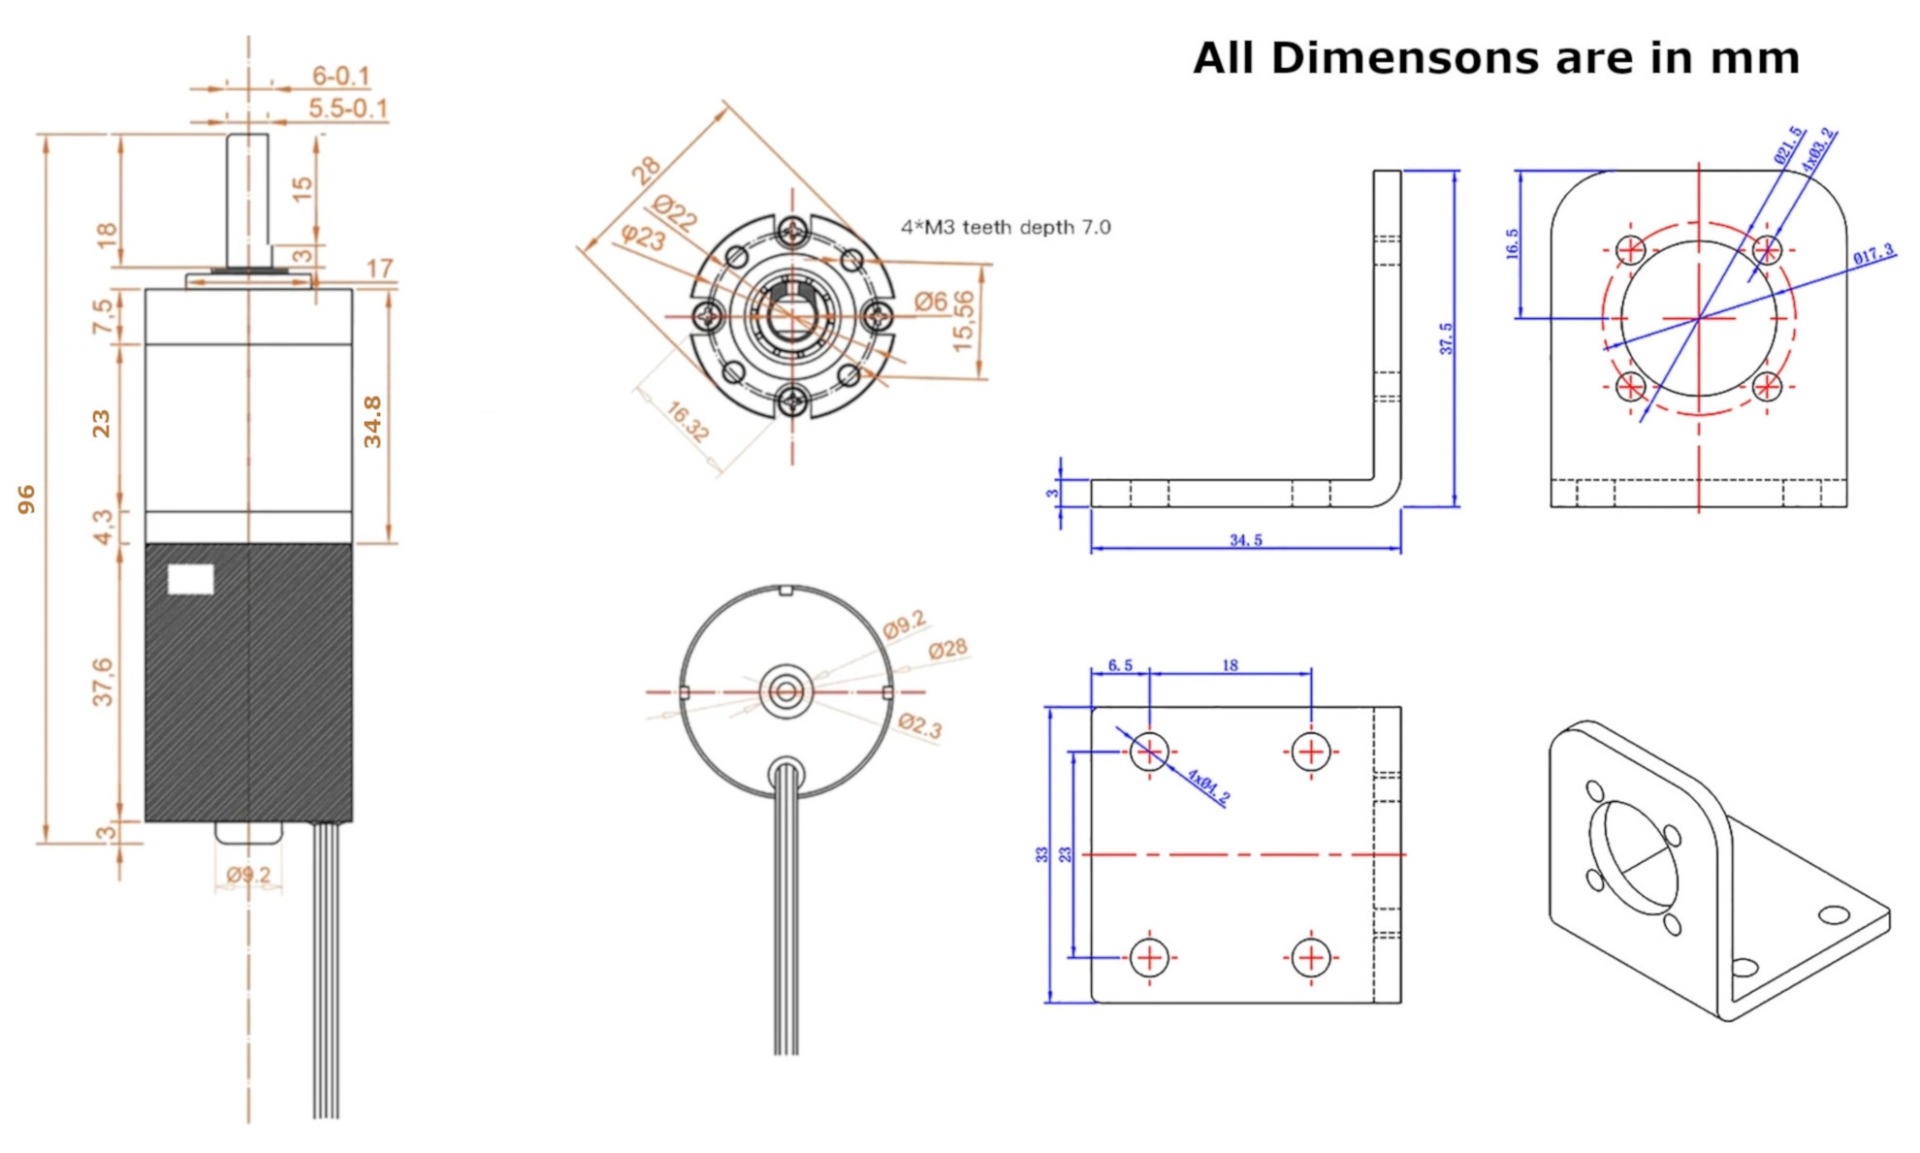 2838 Planetary Gear Brushless DC Motor-Dimensions